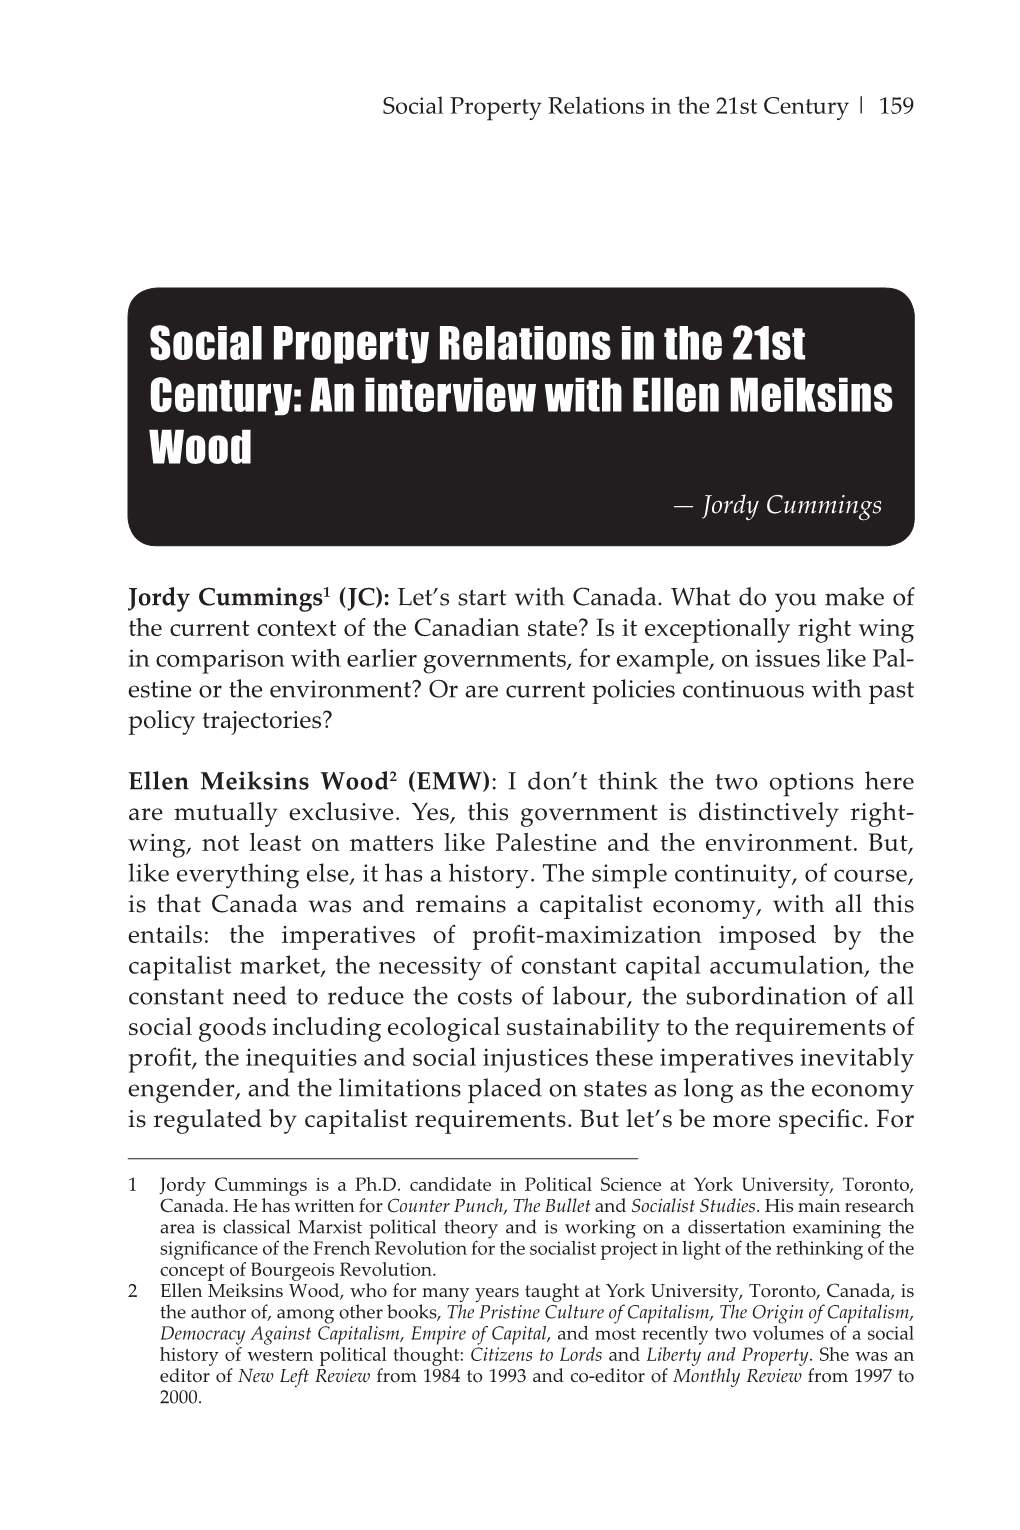 Social Property Relations in the 21St Century: an Interview with Ellen Meiksins Wood — Jordy Cummings